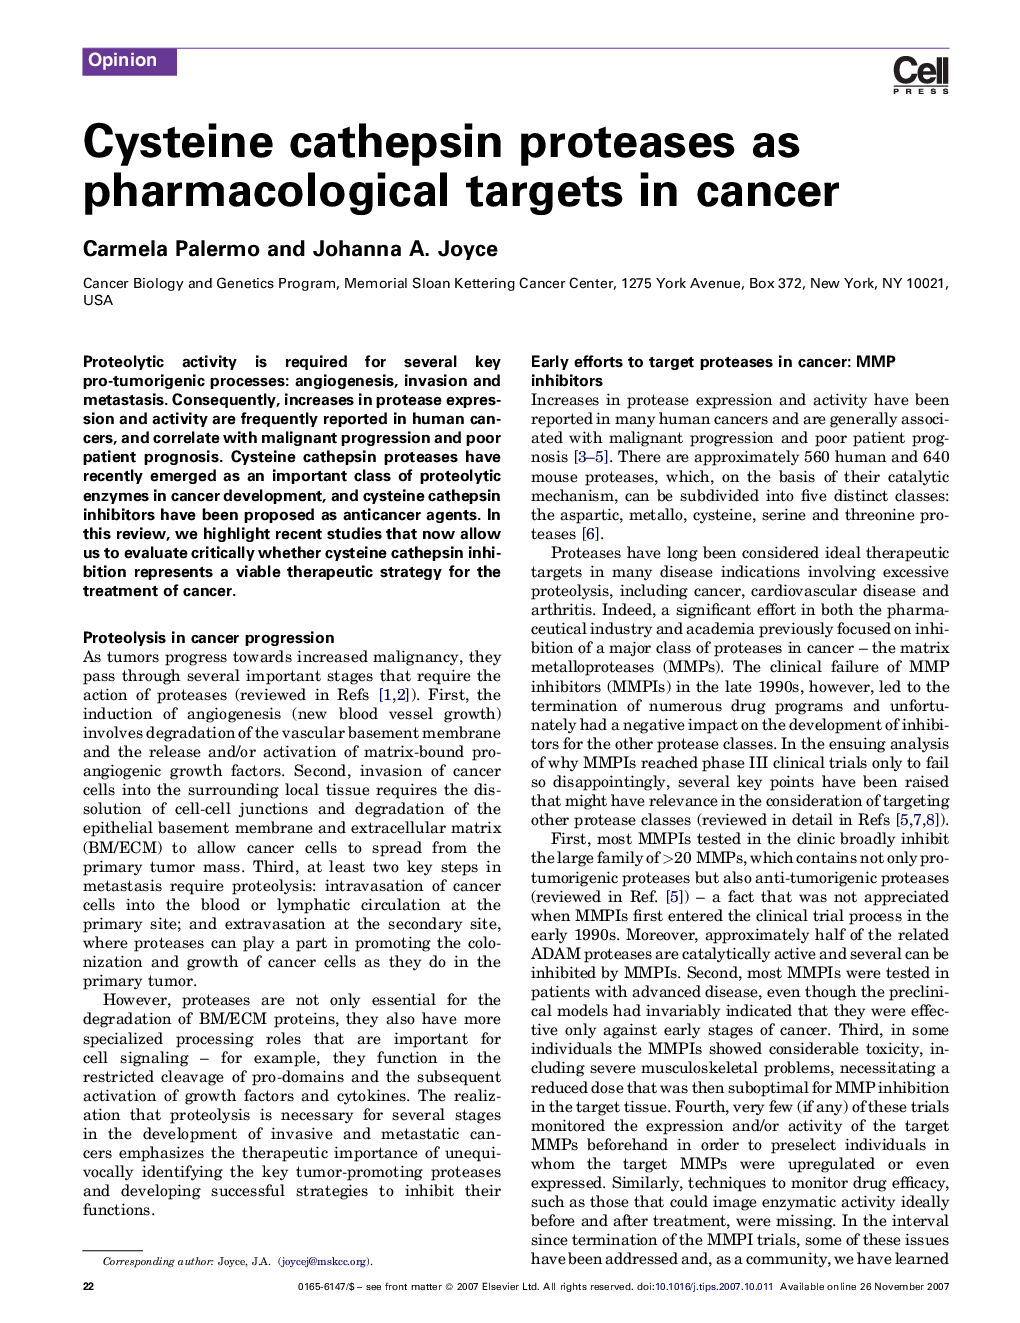 Cysteine cathepsin proteases as pharmacological targets in cancer